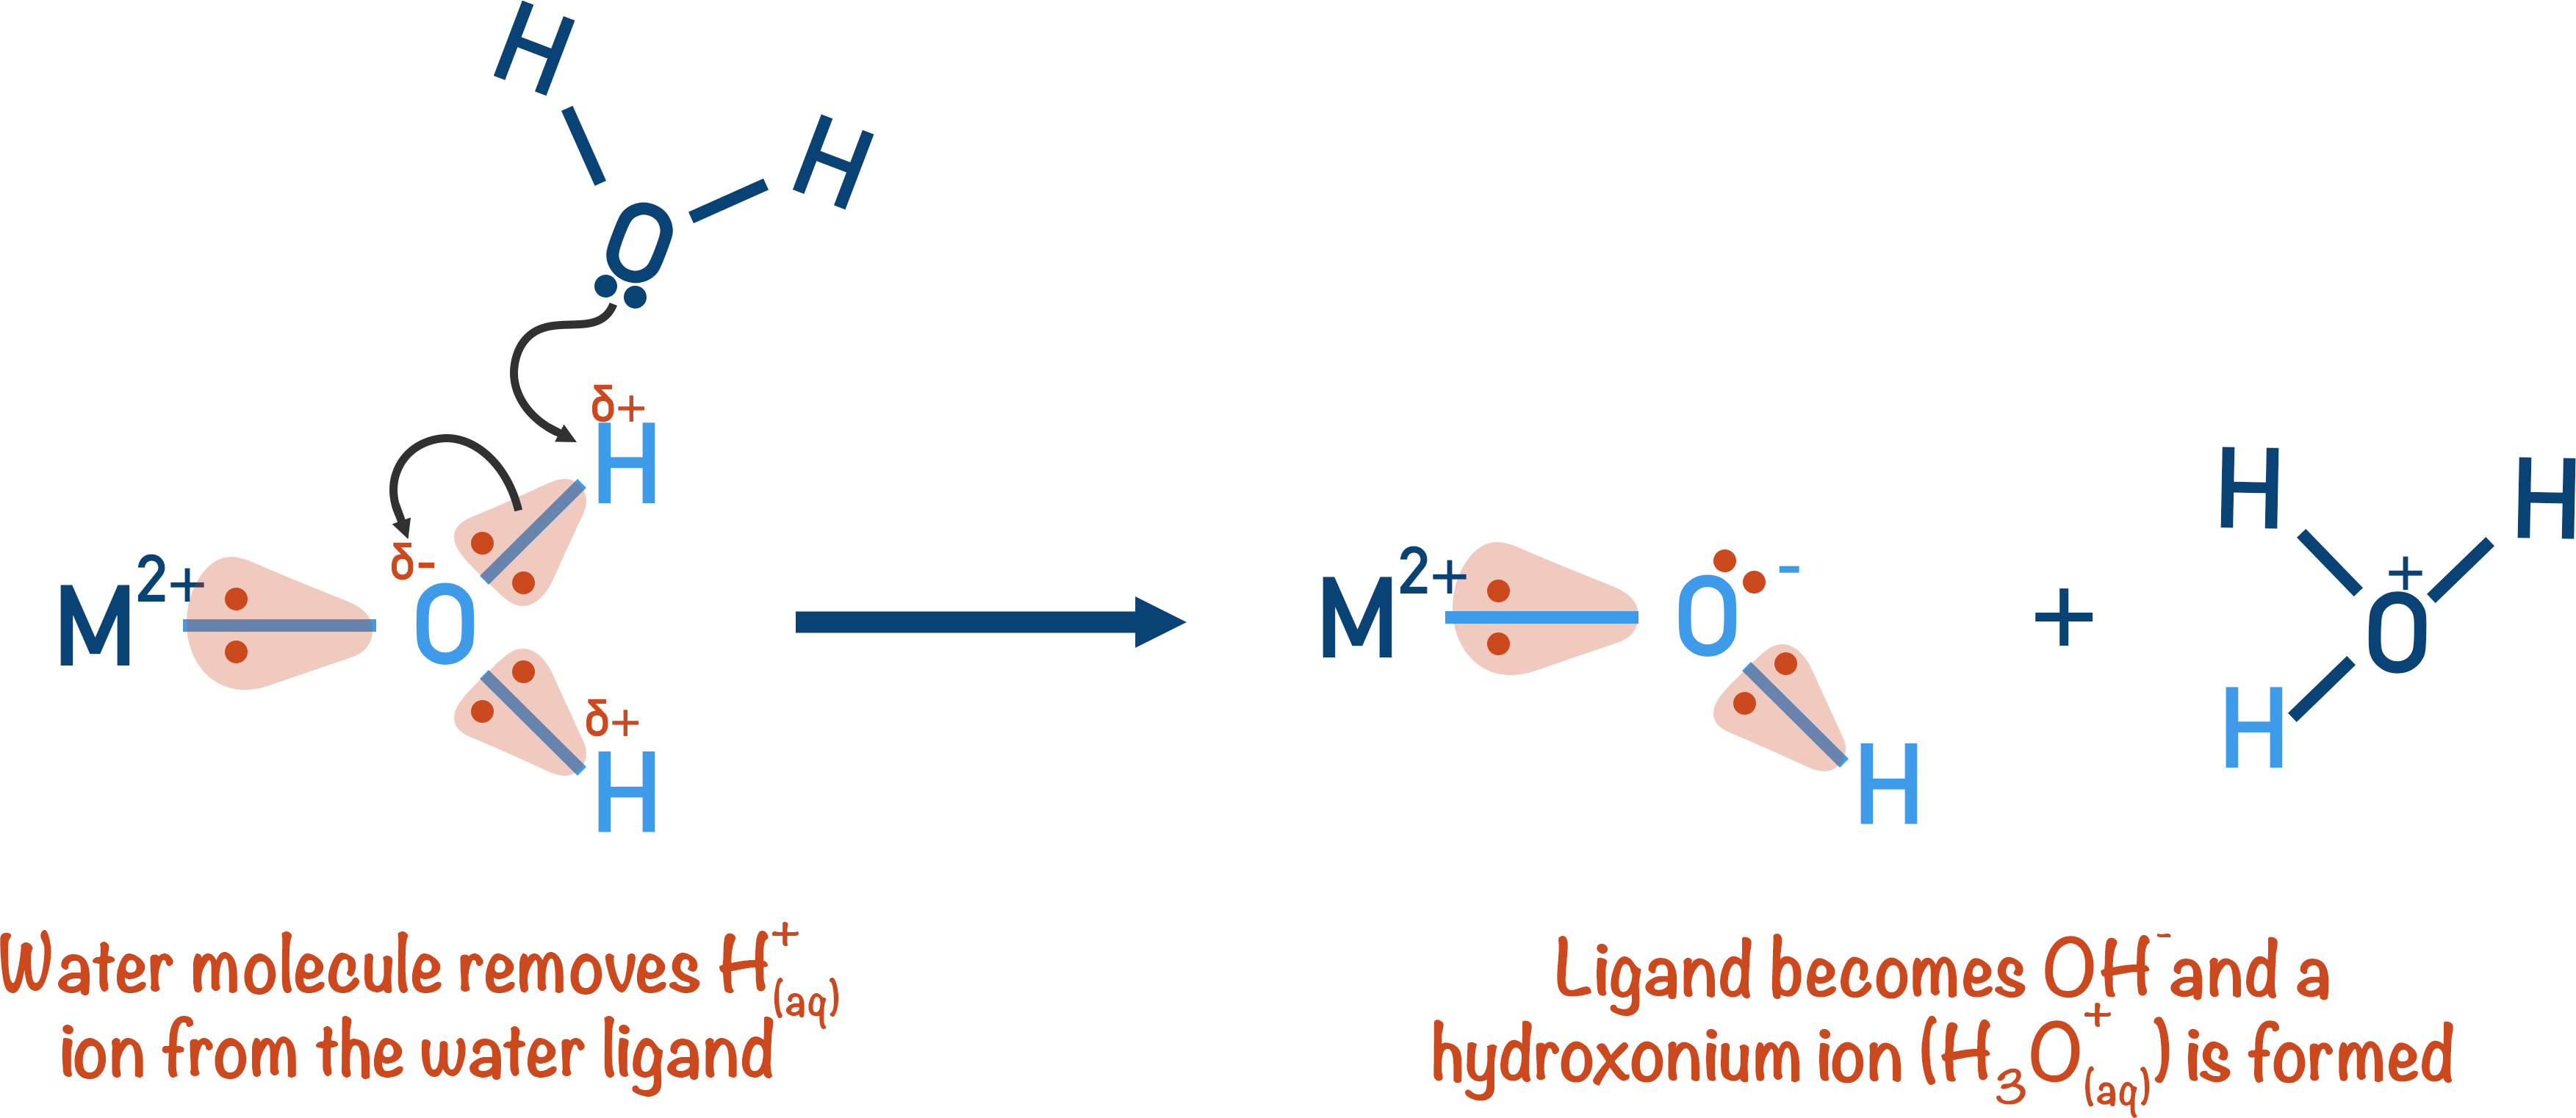 water removing proton from water ligand acid-base precipitation